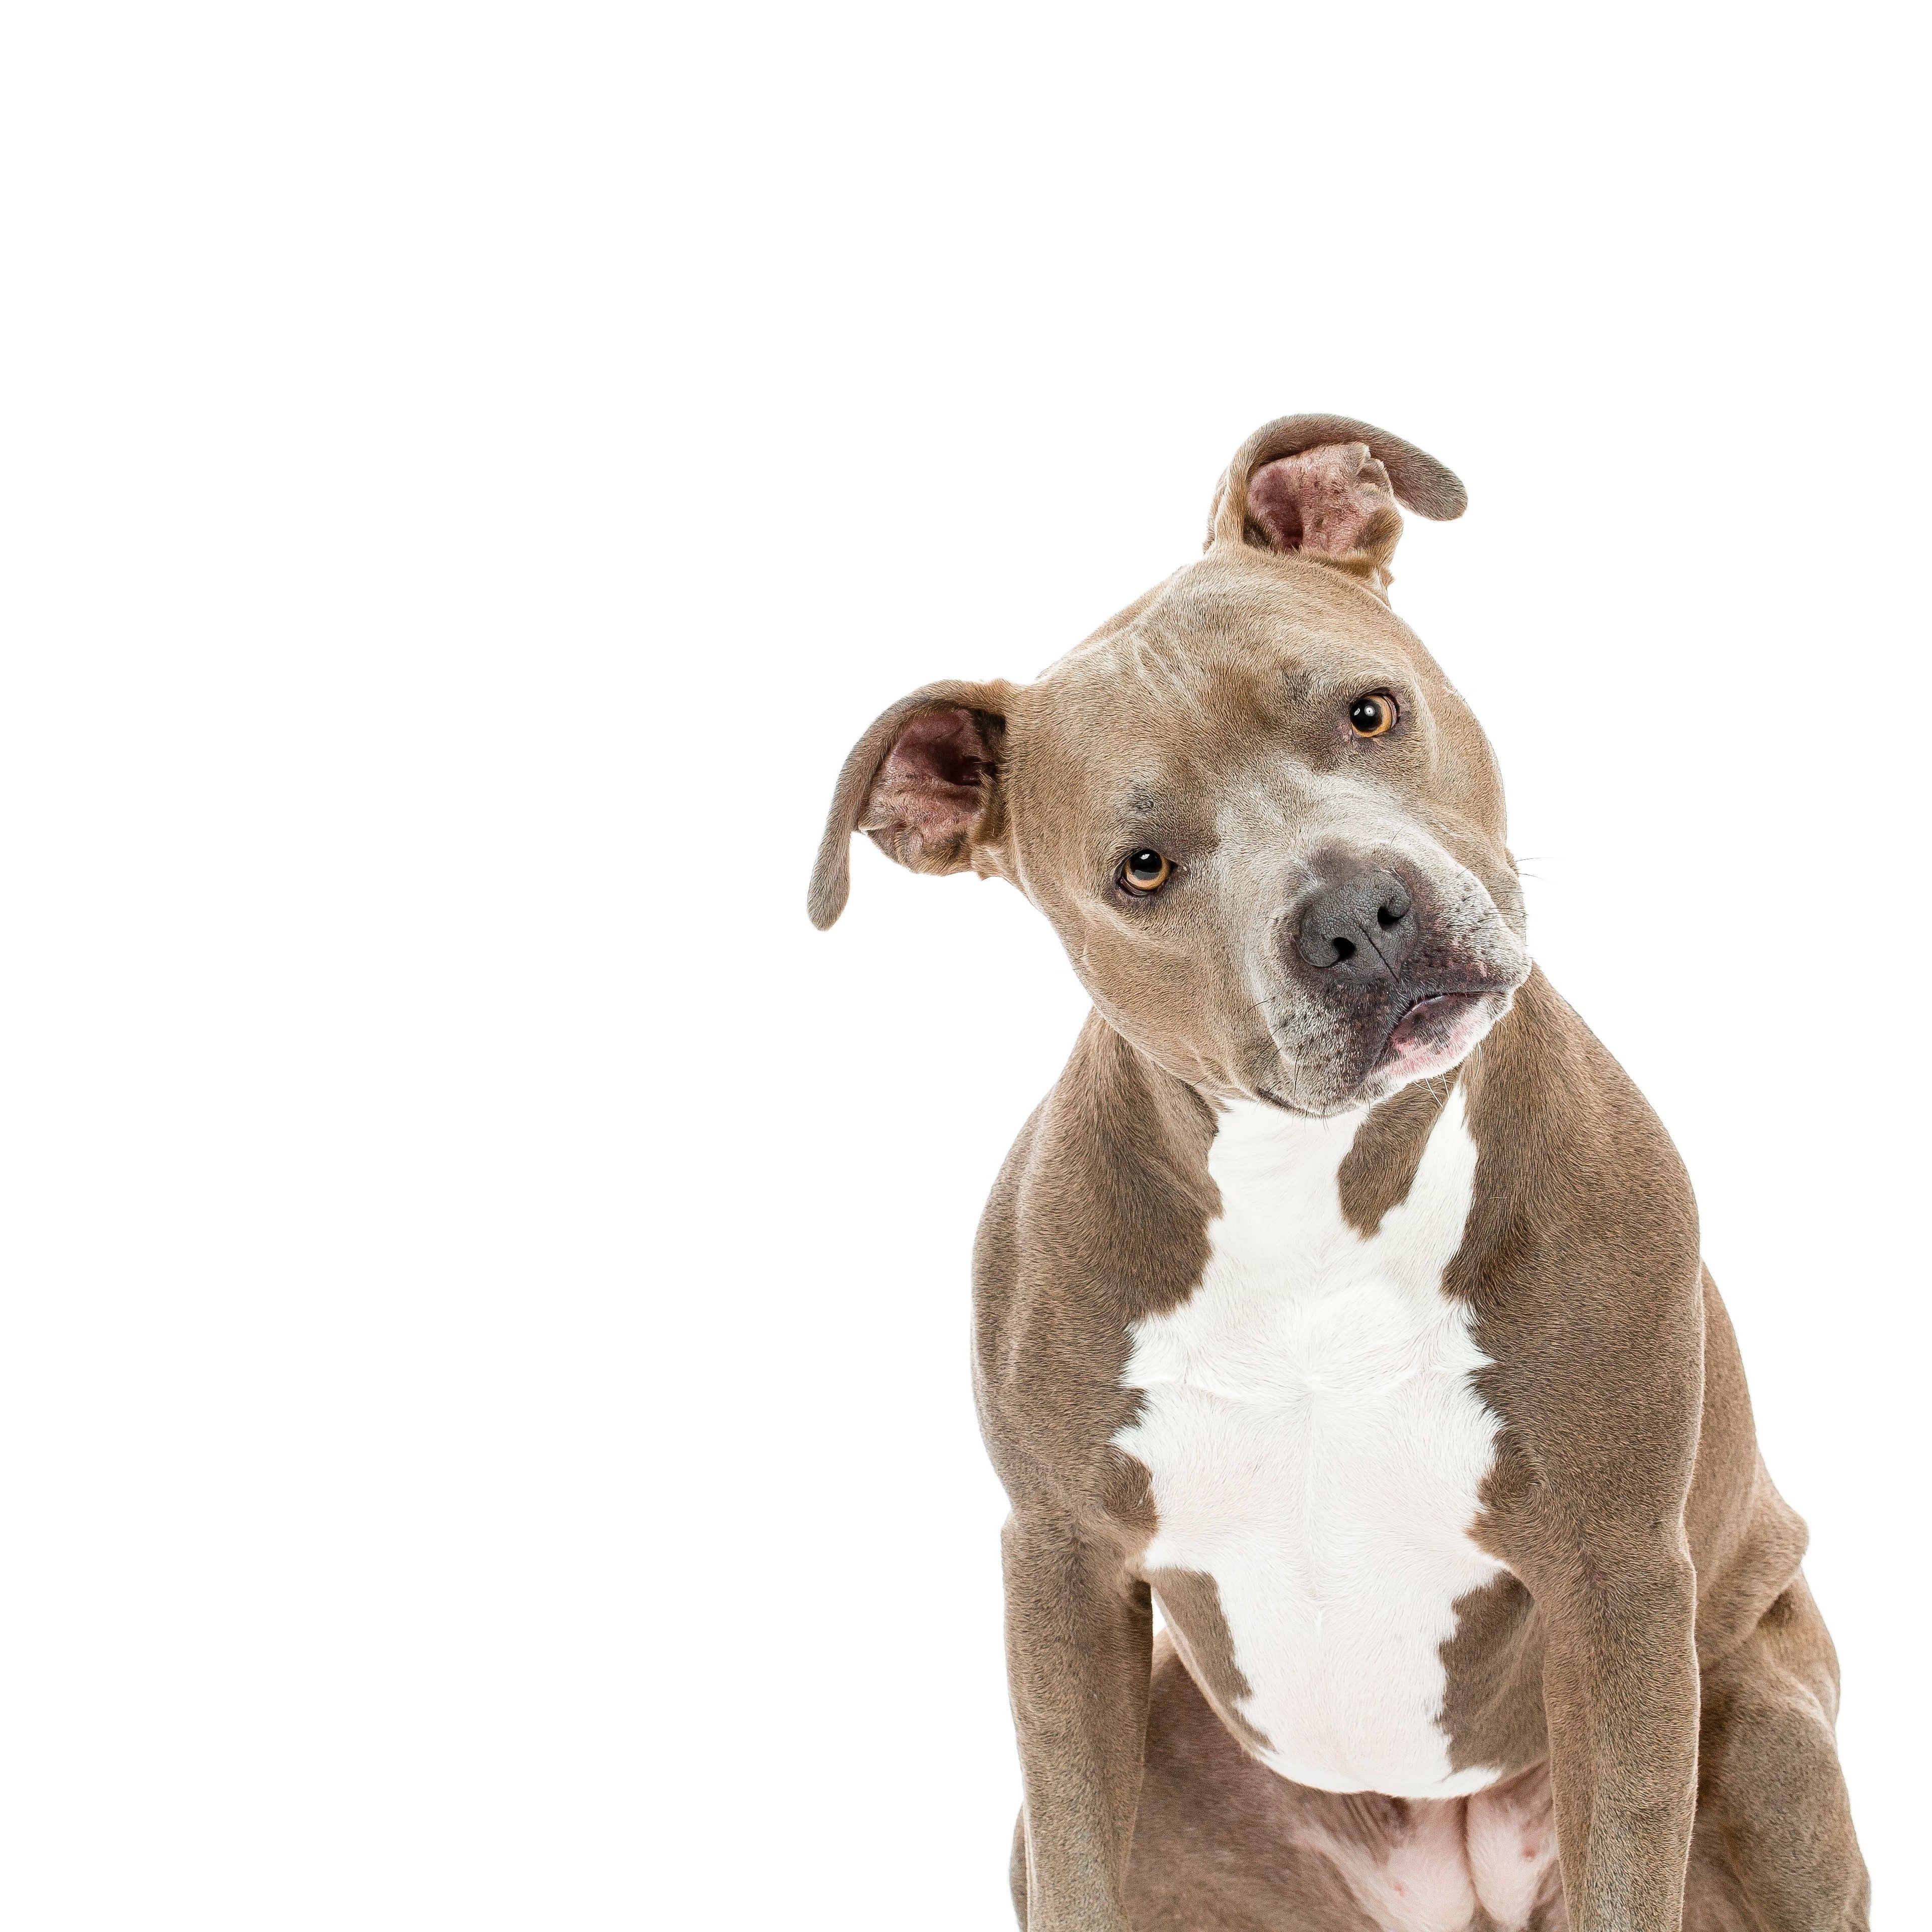 Helping You Live a Happy, Healthy Life with Your Forever DogNational Pit  Bull Awareness Month: A Celebration of “Pit Bull” Type Dogs